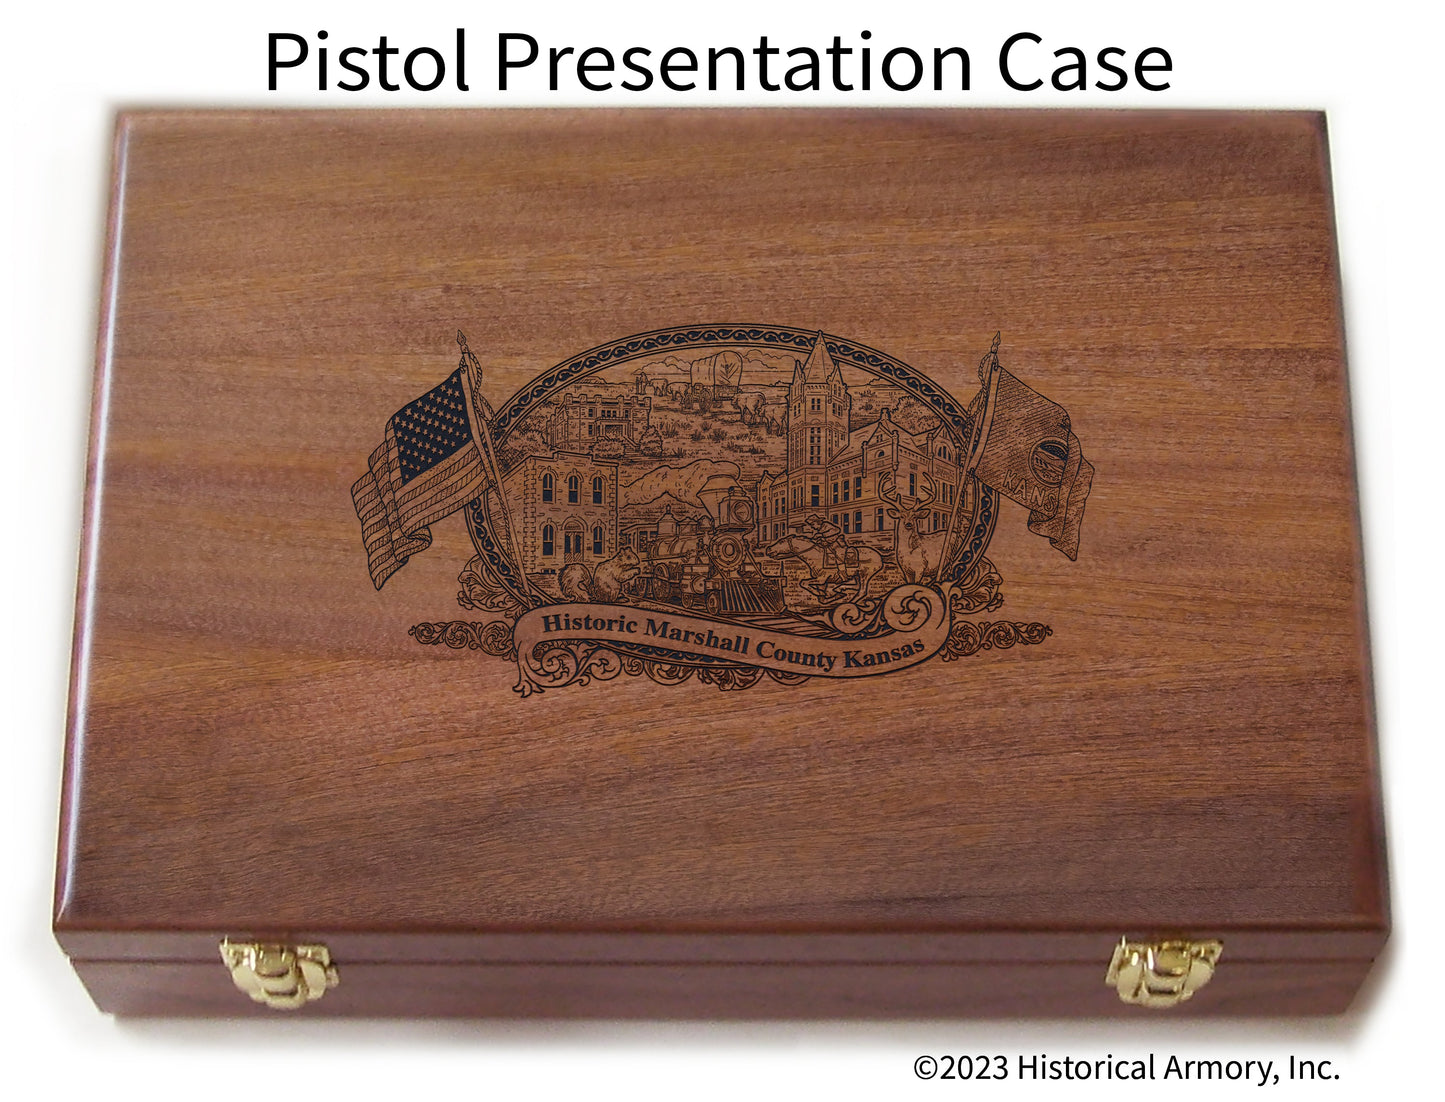 Marshall County Kansas Engraved .45 Auto Ruger 1911 Presentation Case